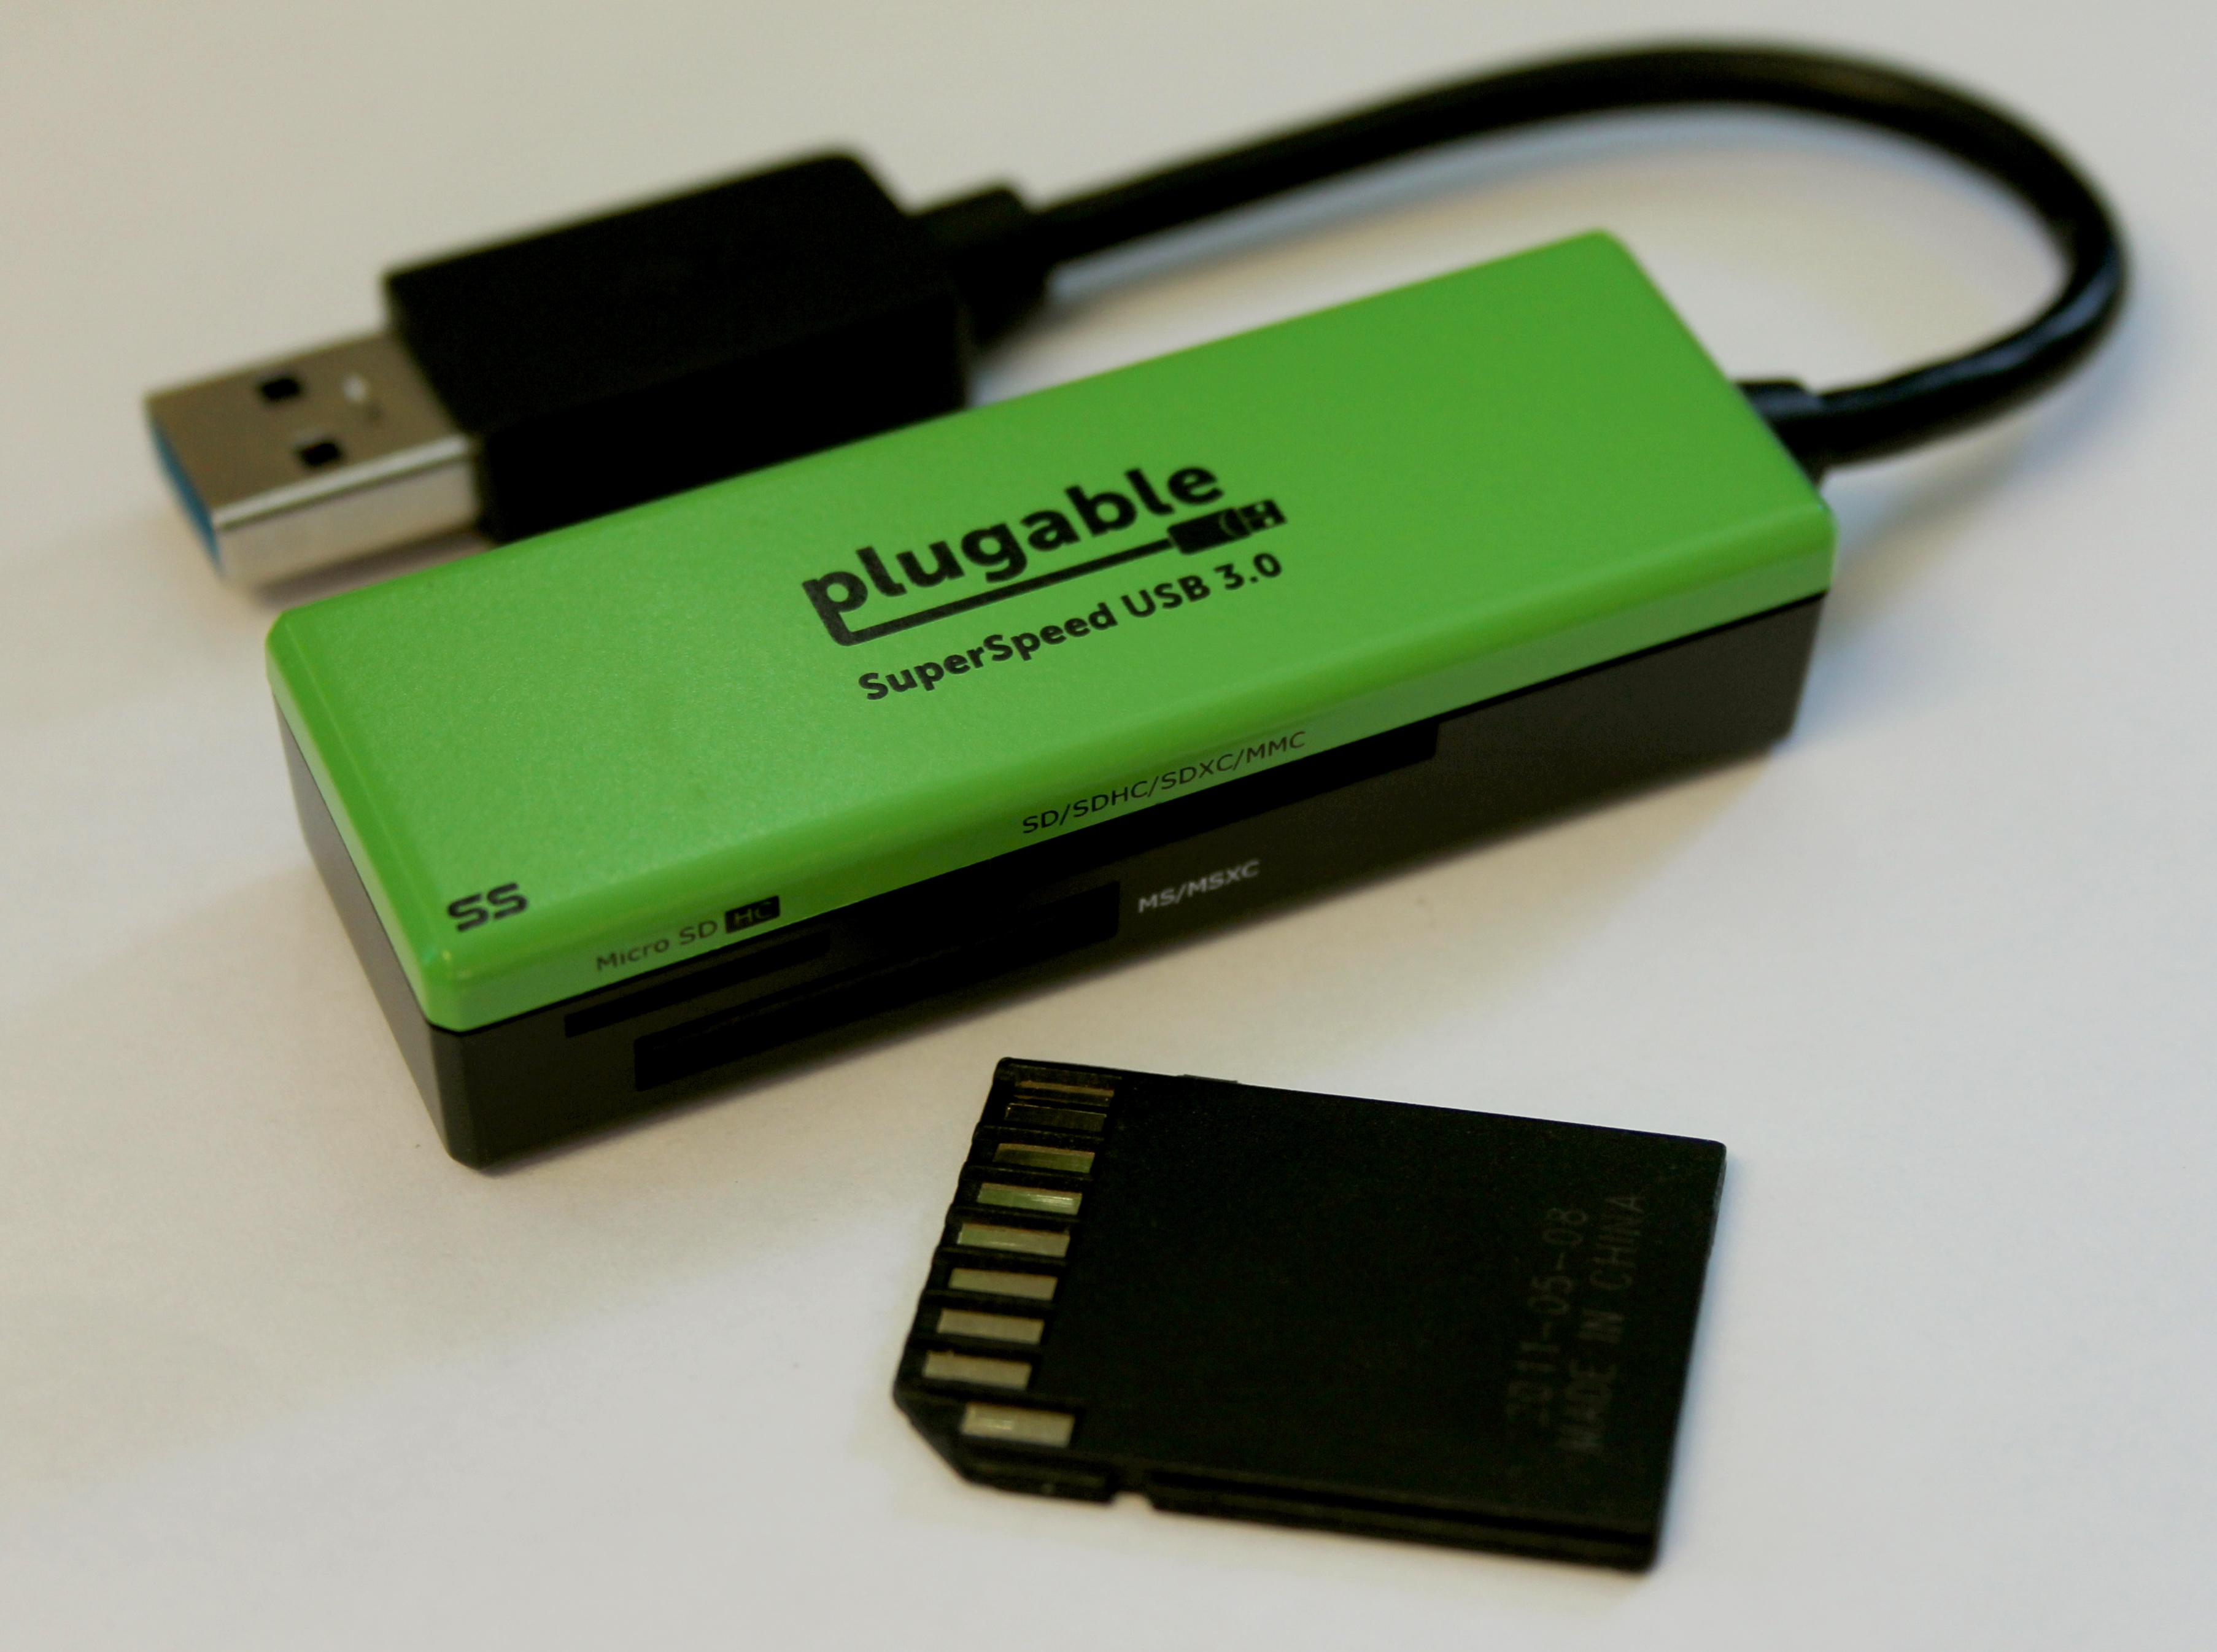 Plugable SuperSpeed USB 3.0 Flash Memory Card Reader for Windows, Mac, Linux, and Certain Android Systems - Supports SD, SDHC, SDXC, Micro SD \ T-Flash, MS, MS Pro Duo, MMC, and More - image 4 of 8